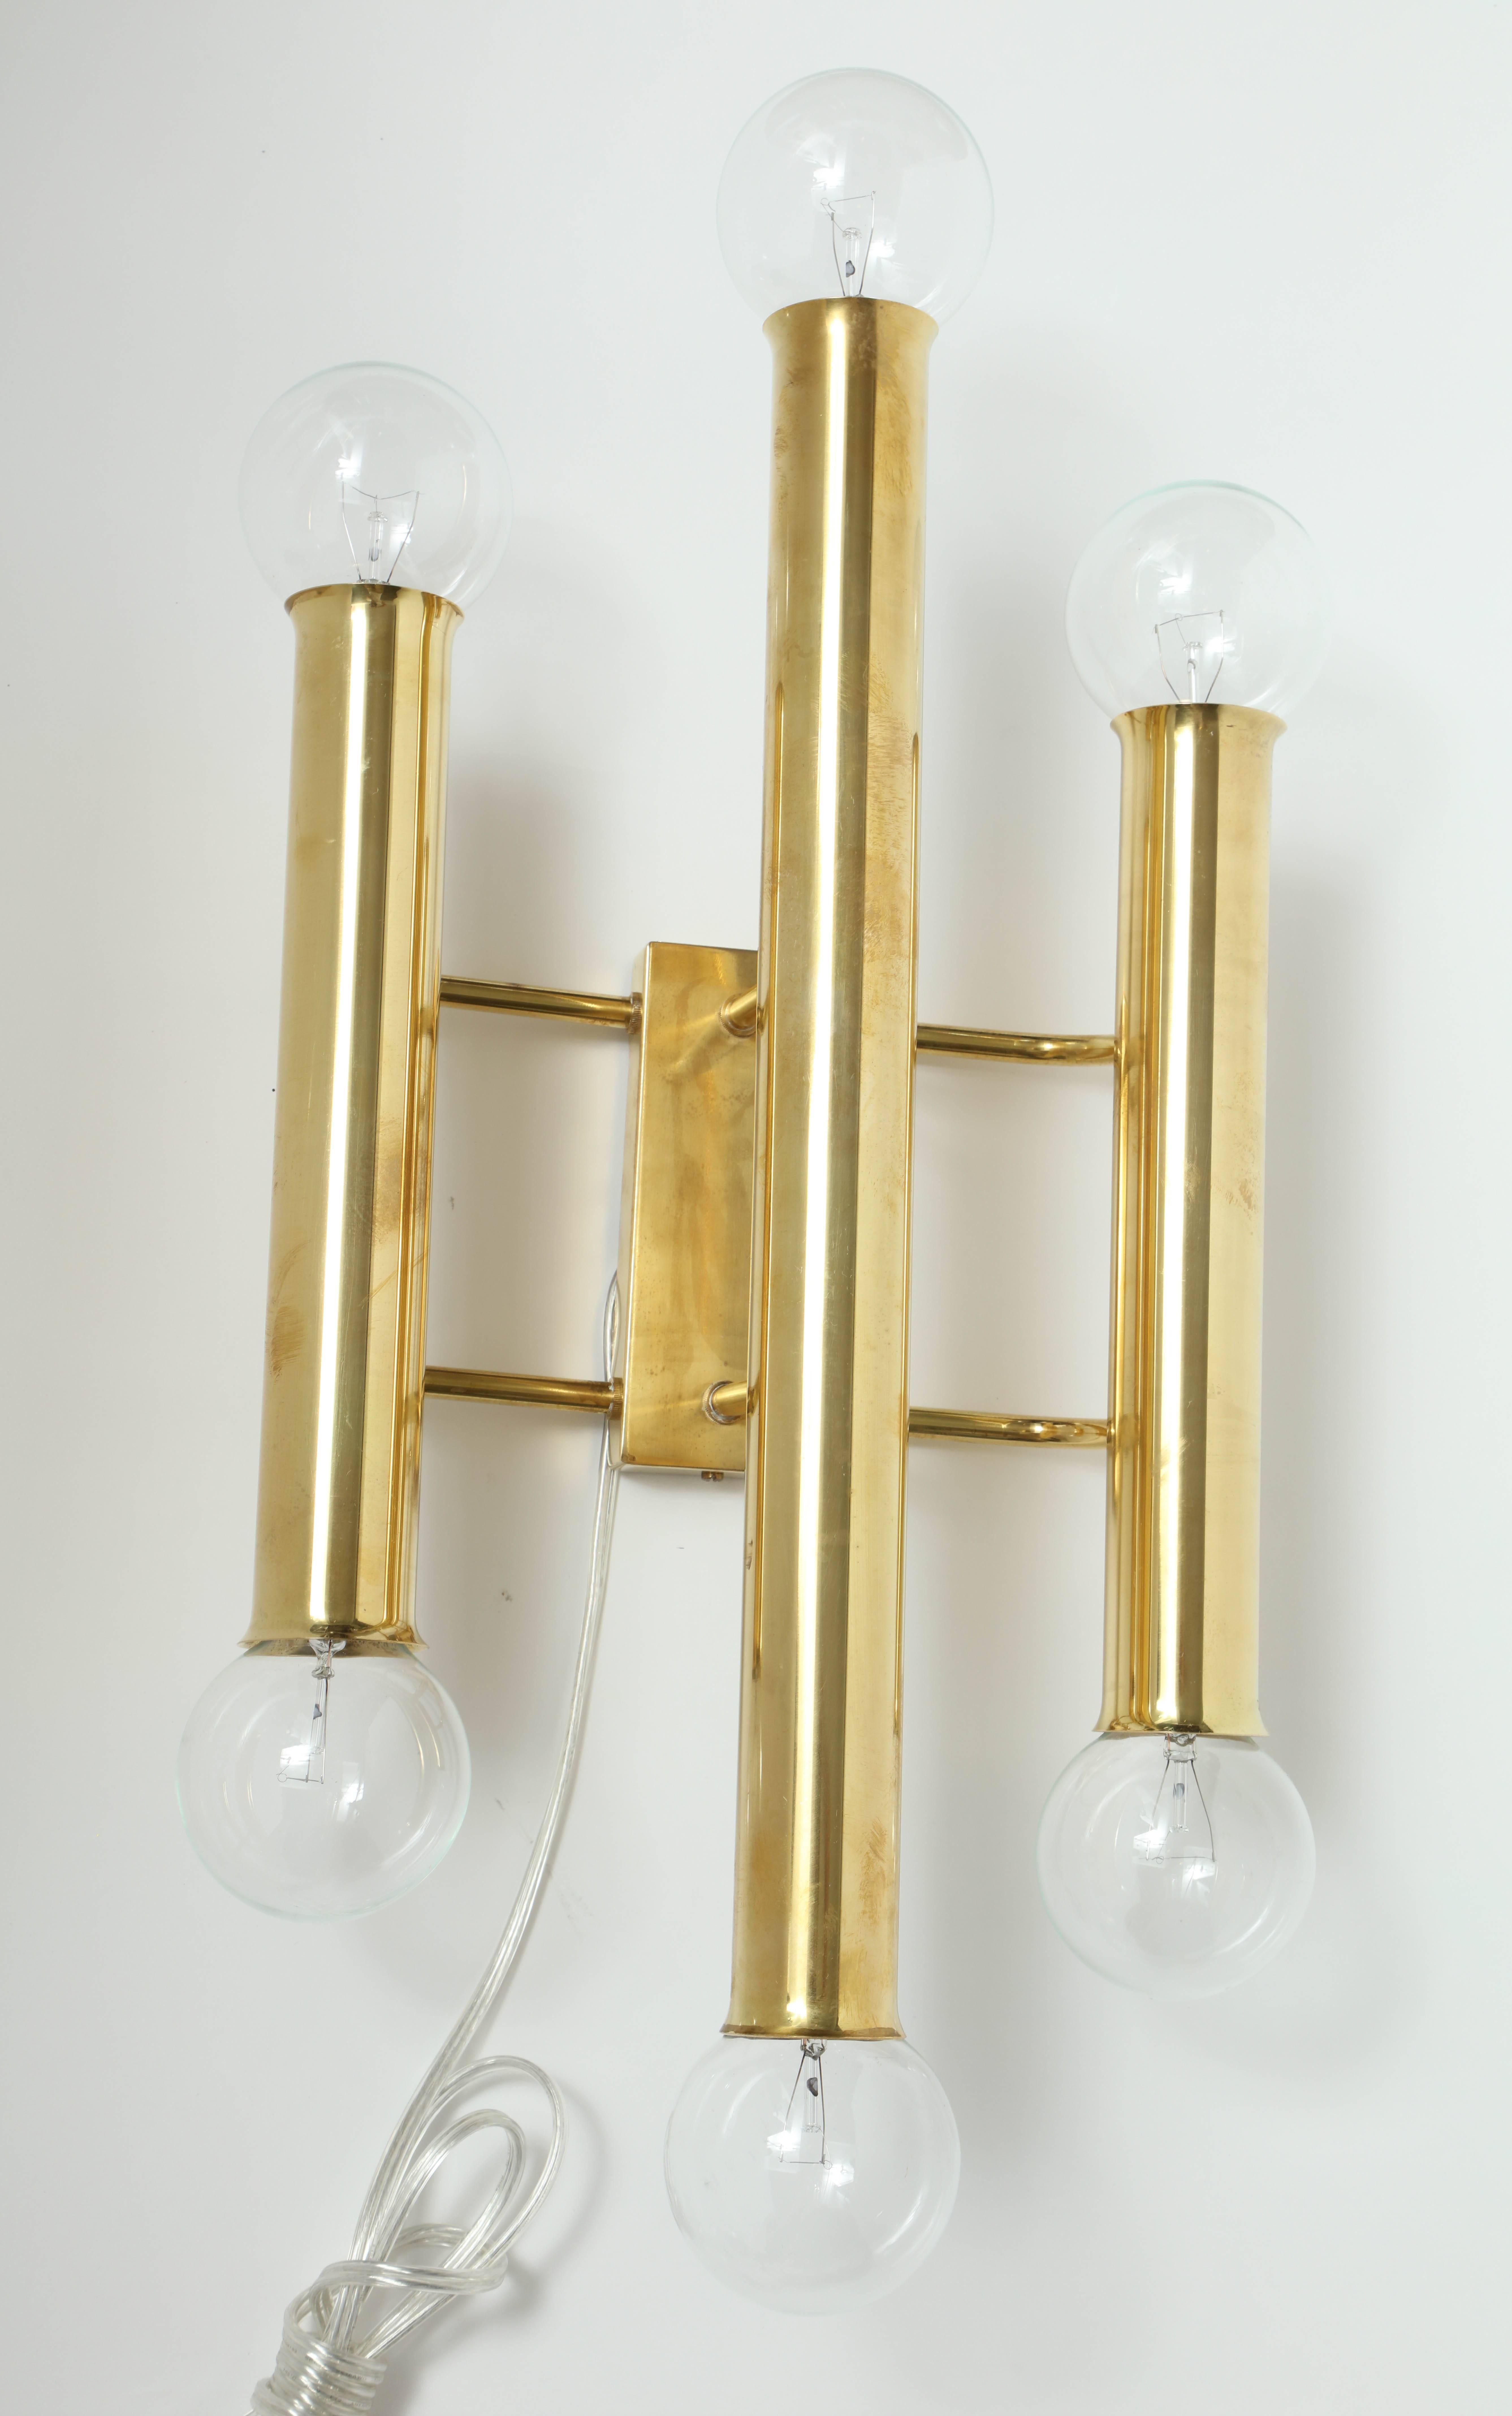 Pair of large scale Minimalist solid brass sconces with six light sources. Rewired for use in the USA. The elegant simple lines of these sconces make them useful in various interior designs.